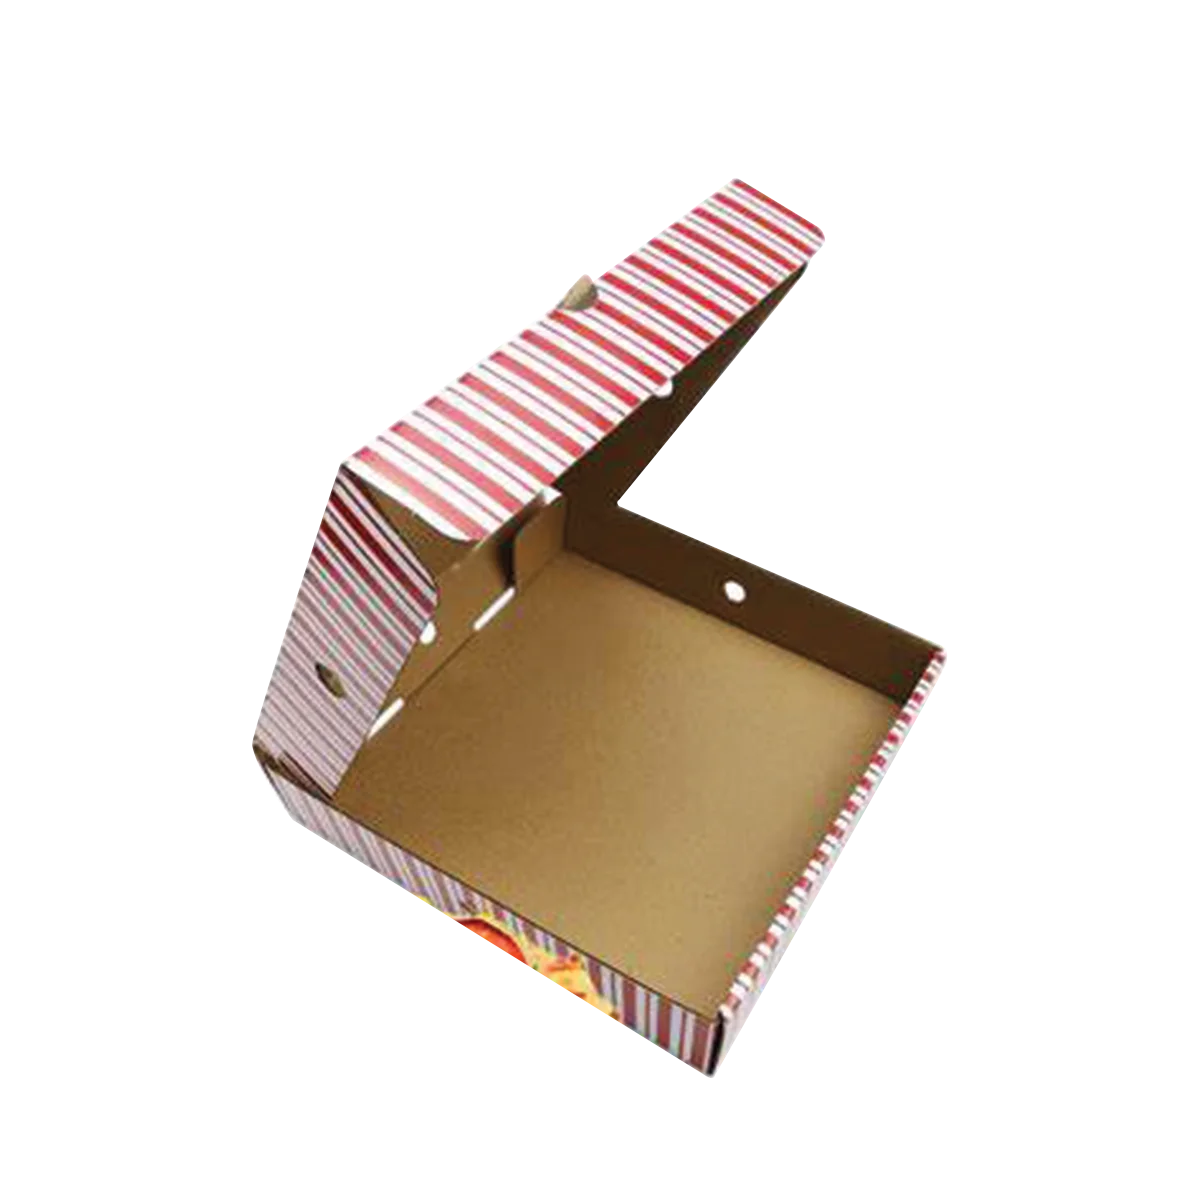 7 inch Pizza Boxes